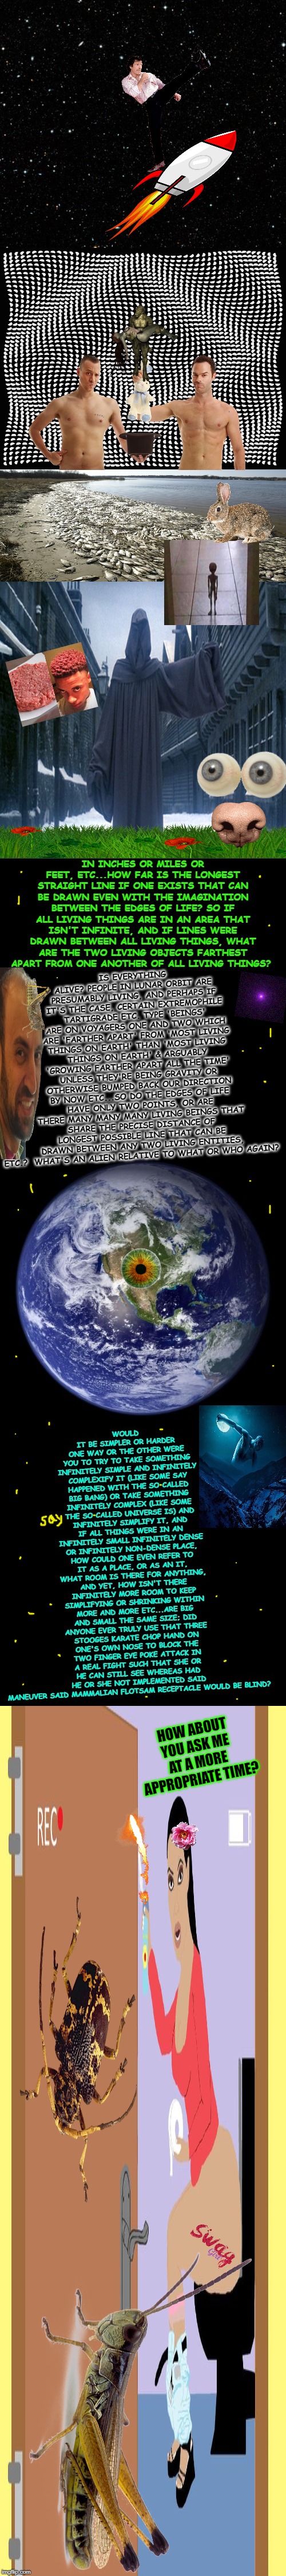 Earth | HOW ABOUT YOU ASK ME AT A MORE APPROPRIATE TIME? | image tagged in earth | made w/ Imgflip meme maker